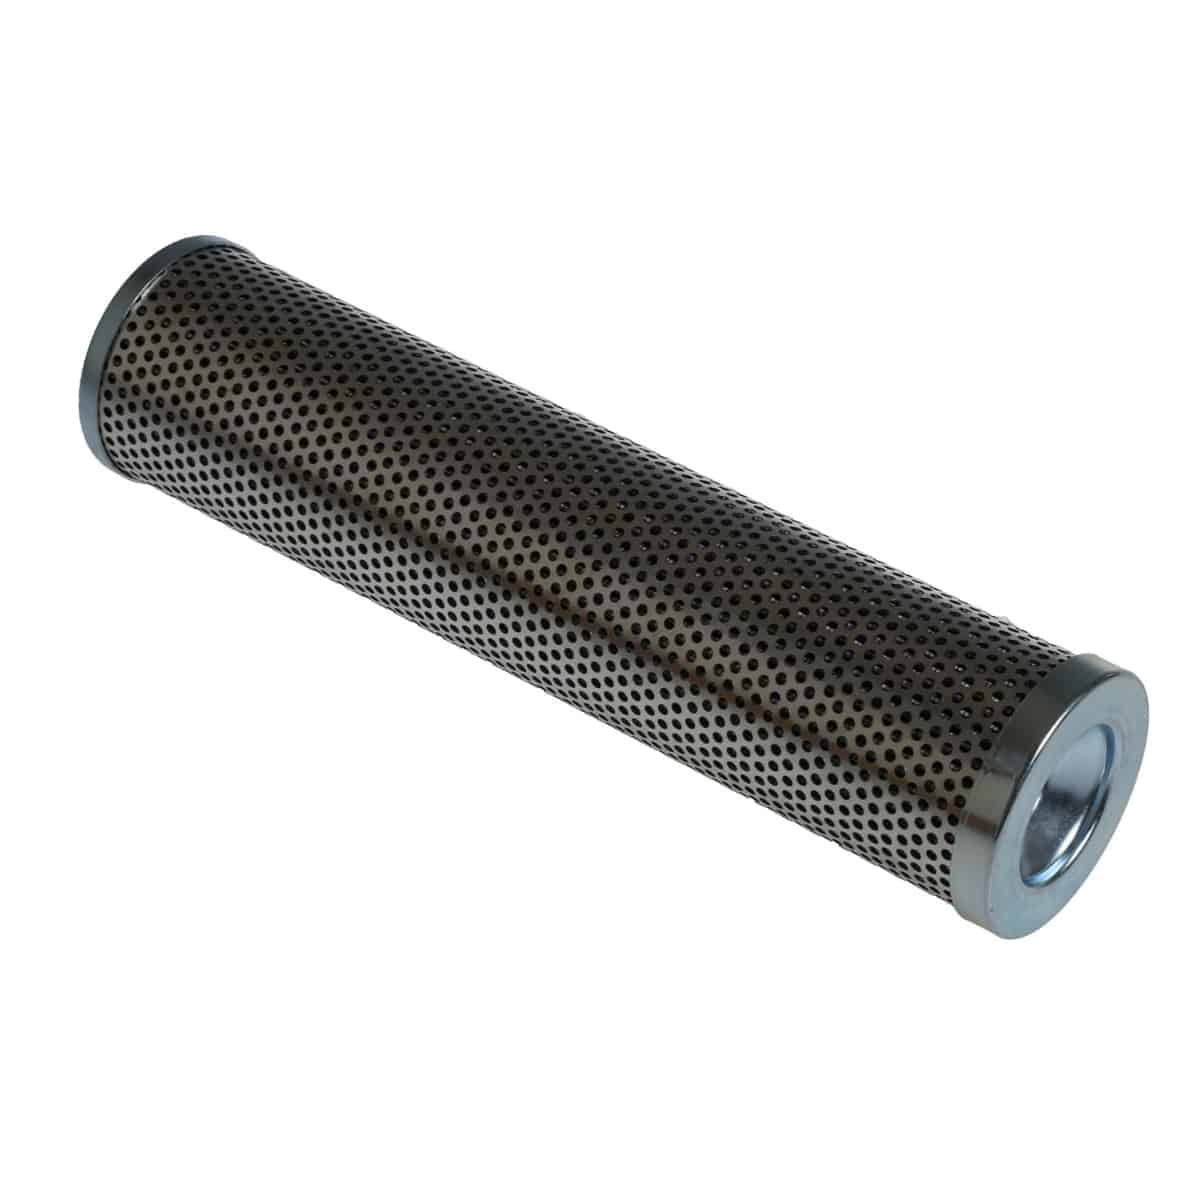 JCB Spare Parts - HYDRAULIC FILTER - 25 MICRON (PART NO. 581/06301) - Kelly  Machine Spares